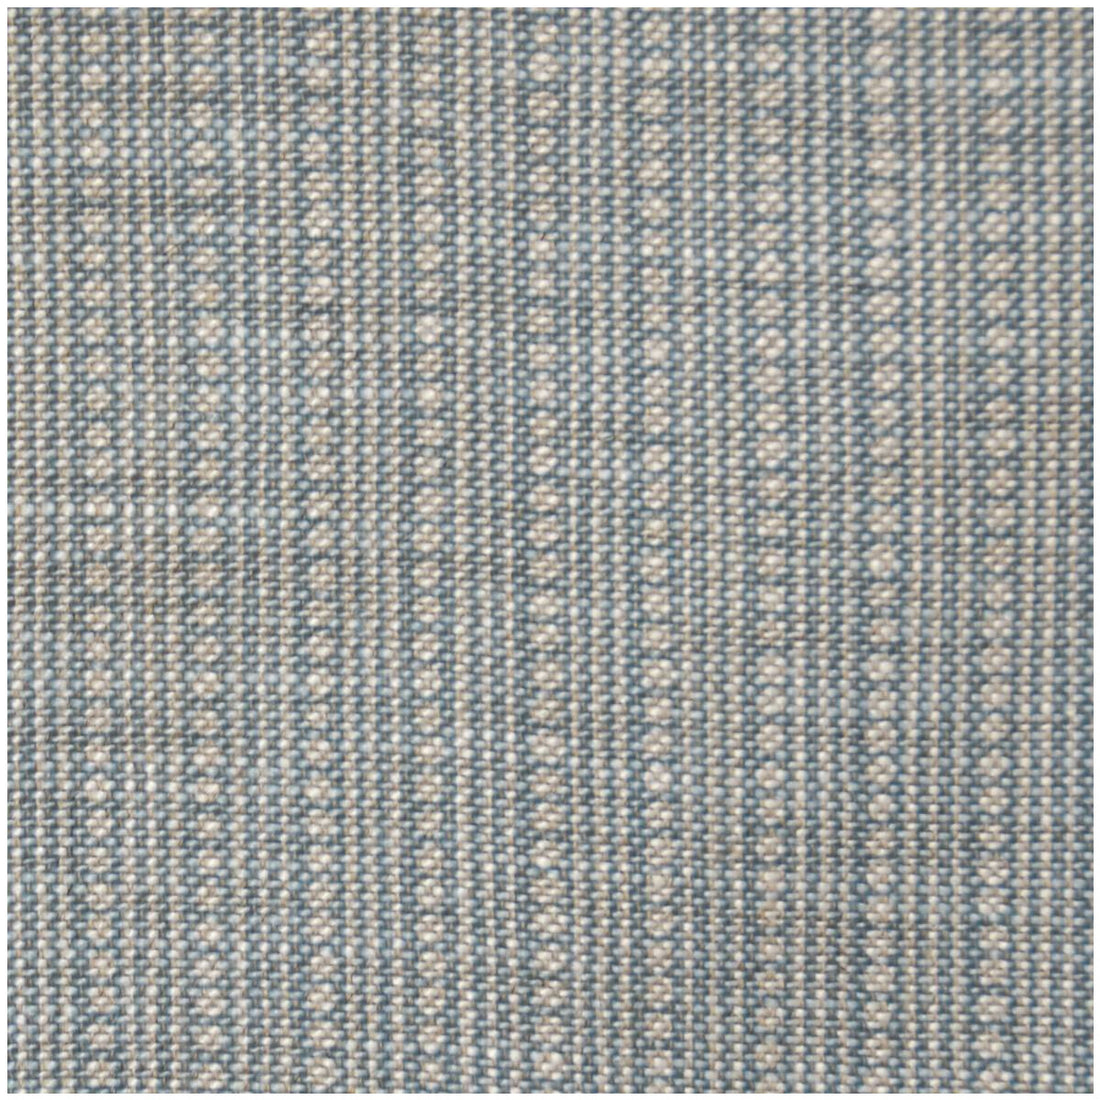 Wicklewood fabric in blue/oatmeal color - pattern BFC-3537.5.0 - by Lee Jofa in the Blithfield collection